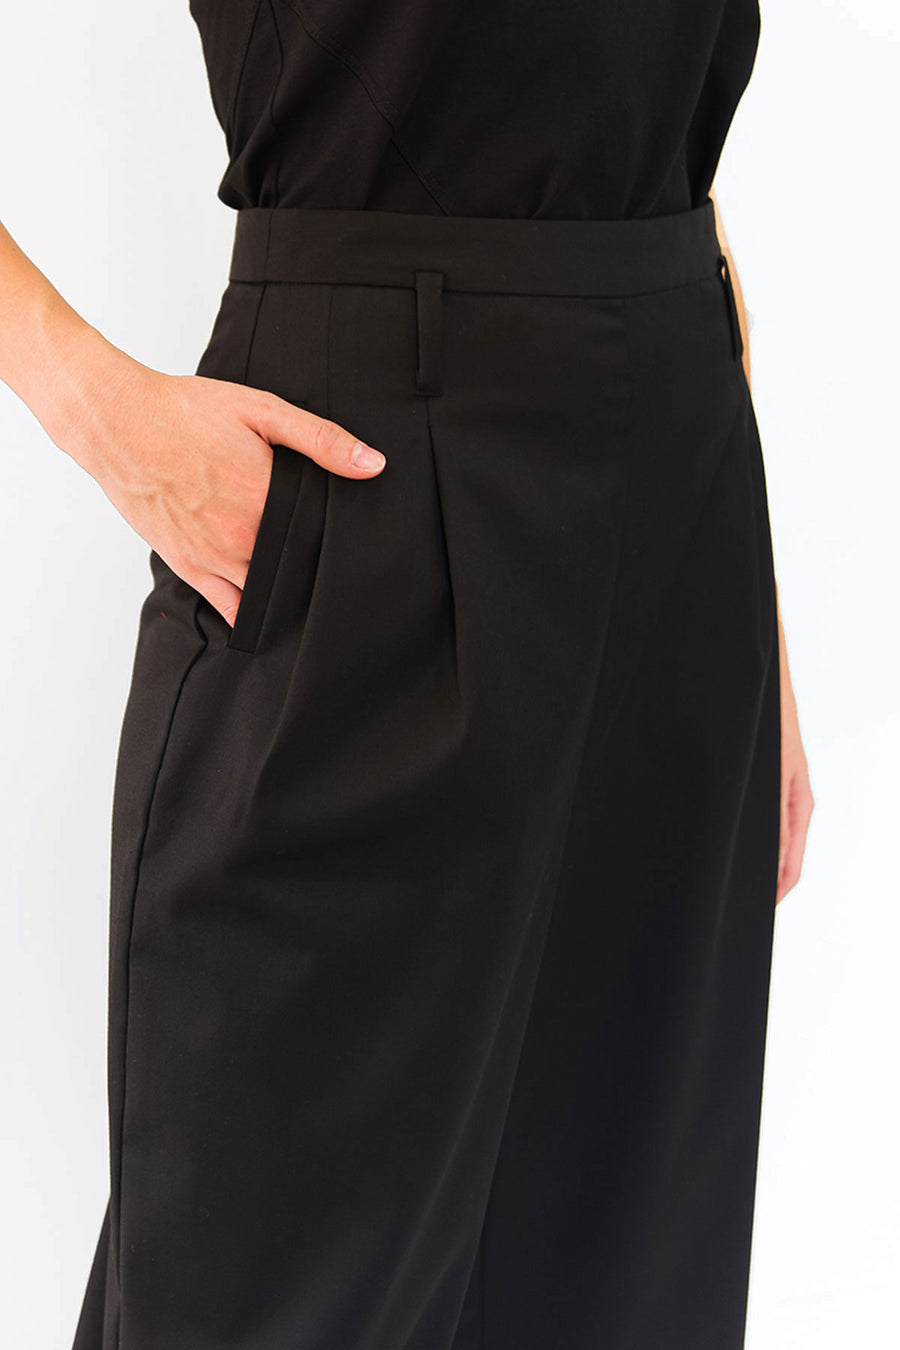 Tailored black pants with pleats